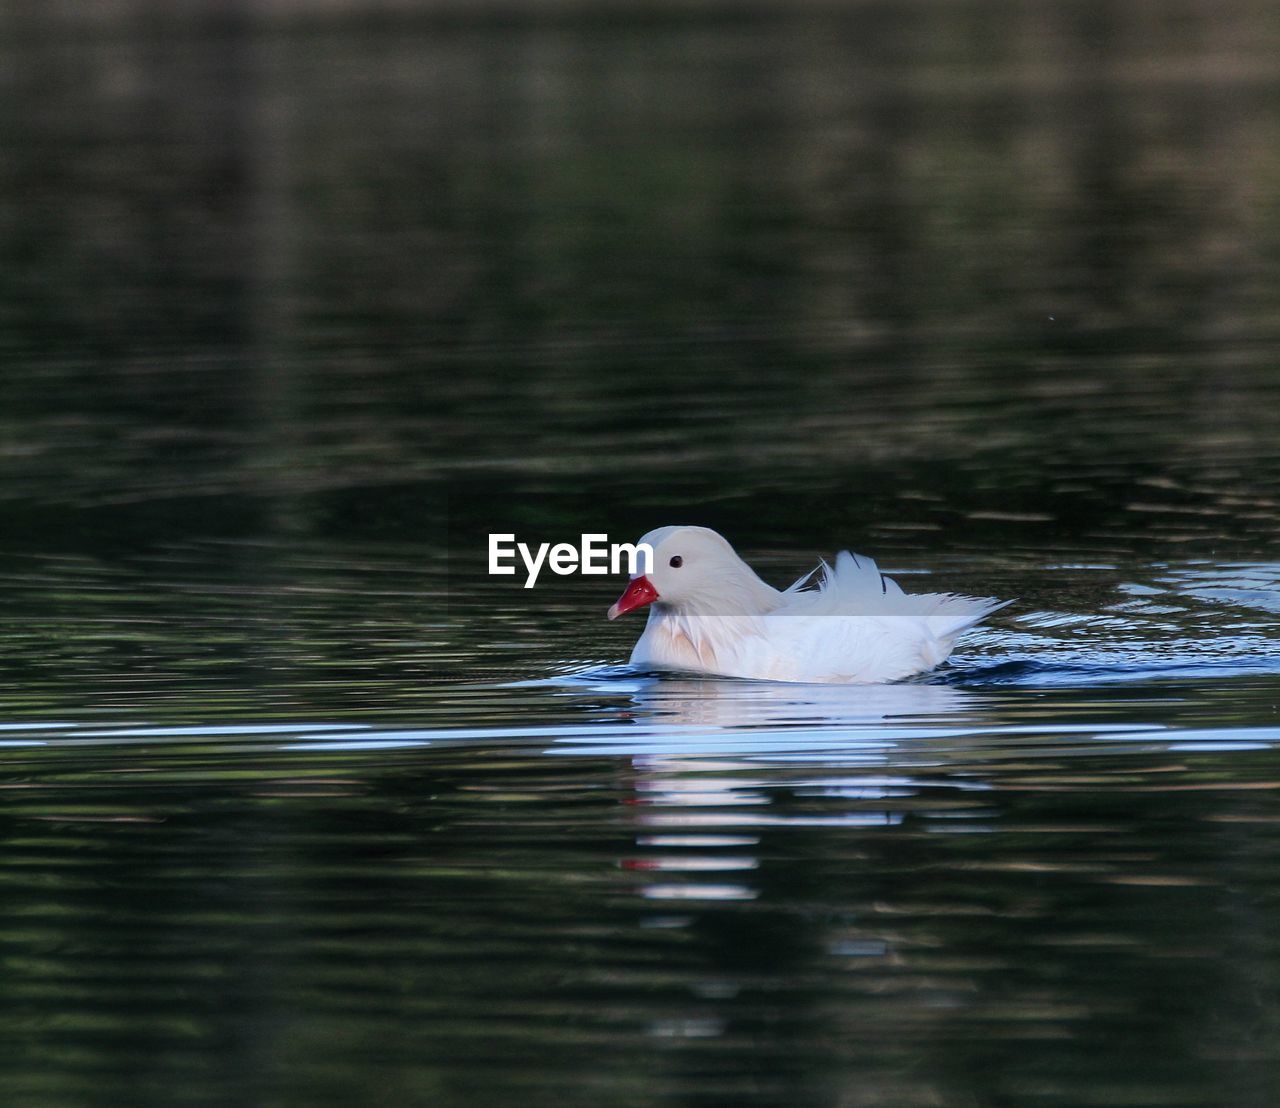 VIEW OF DUCK SWIMMING IN LAKE